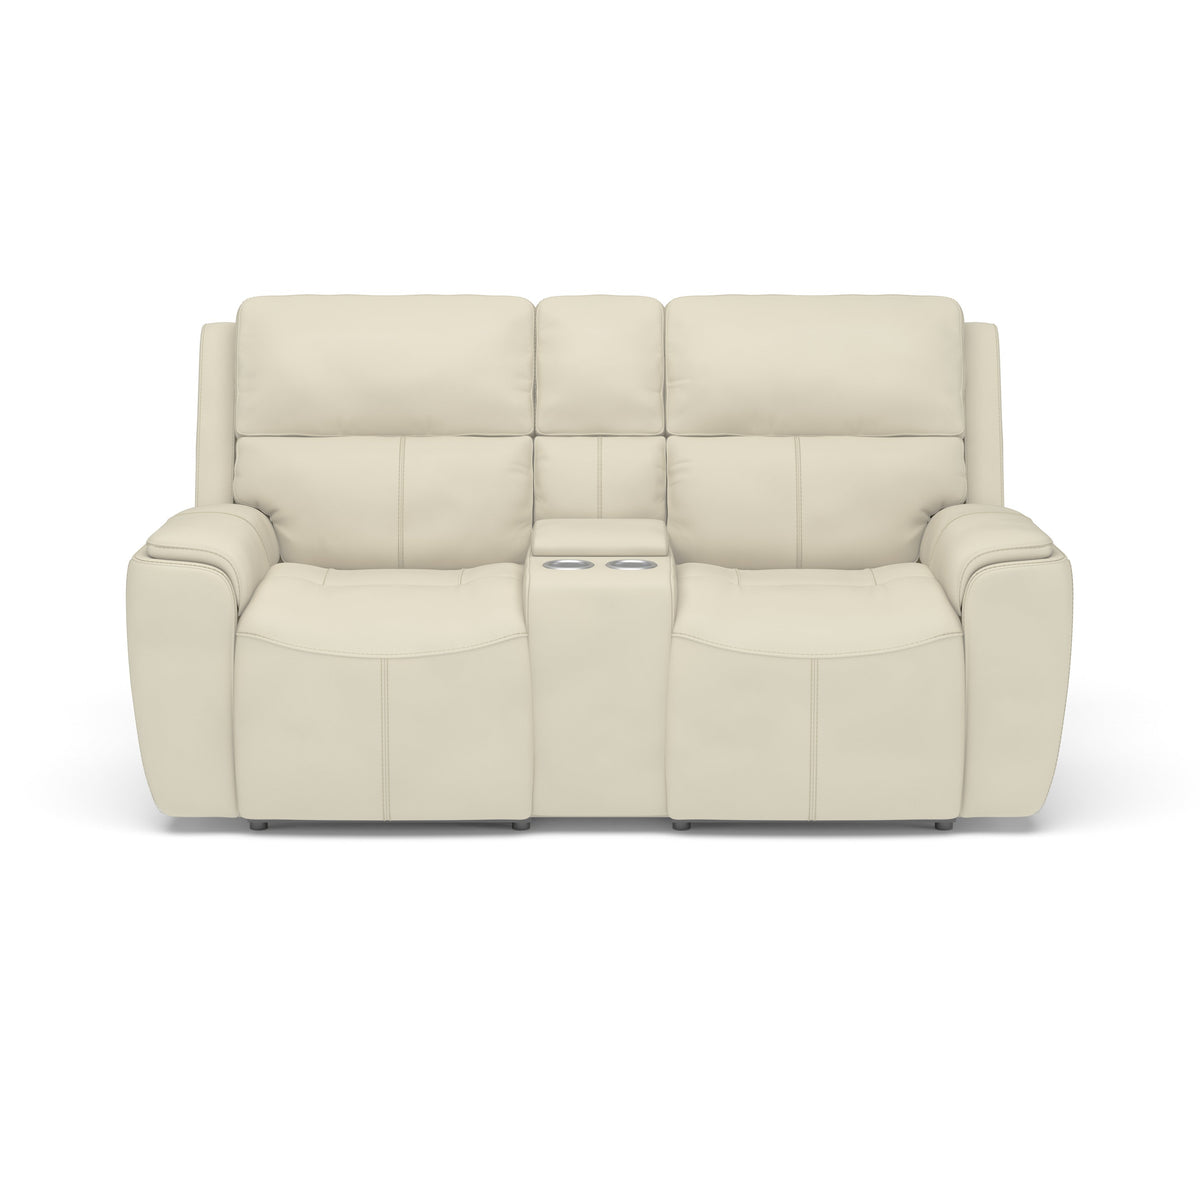 Ellis Power Reclining Loveseat with Console & Power Headrests